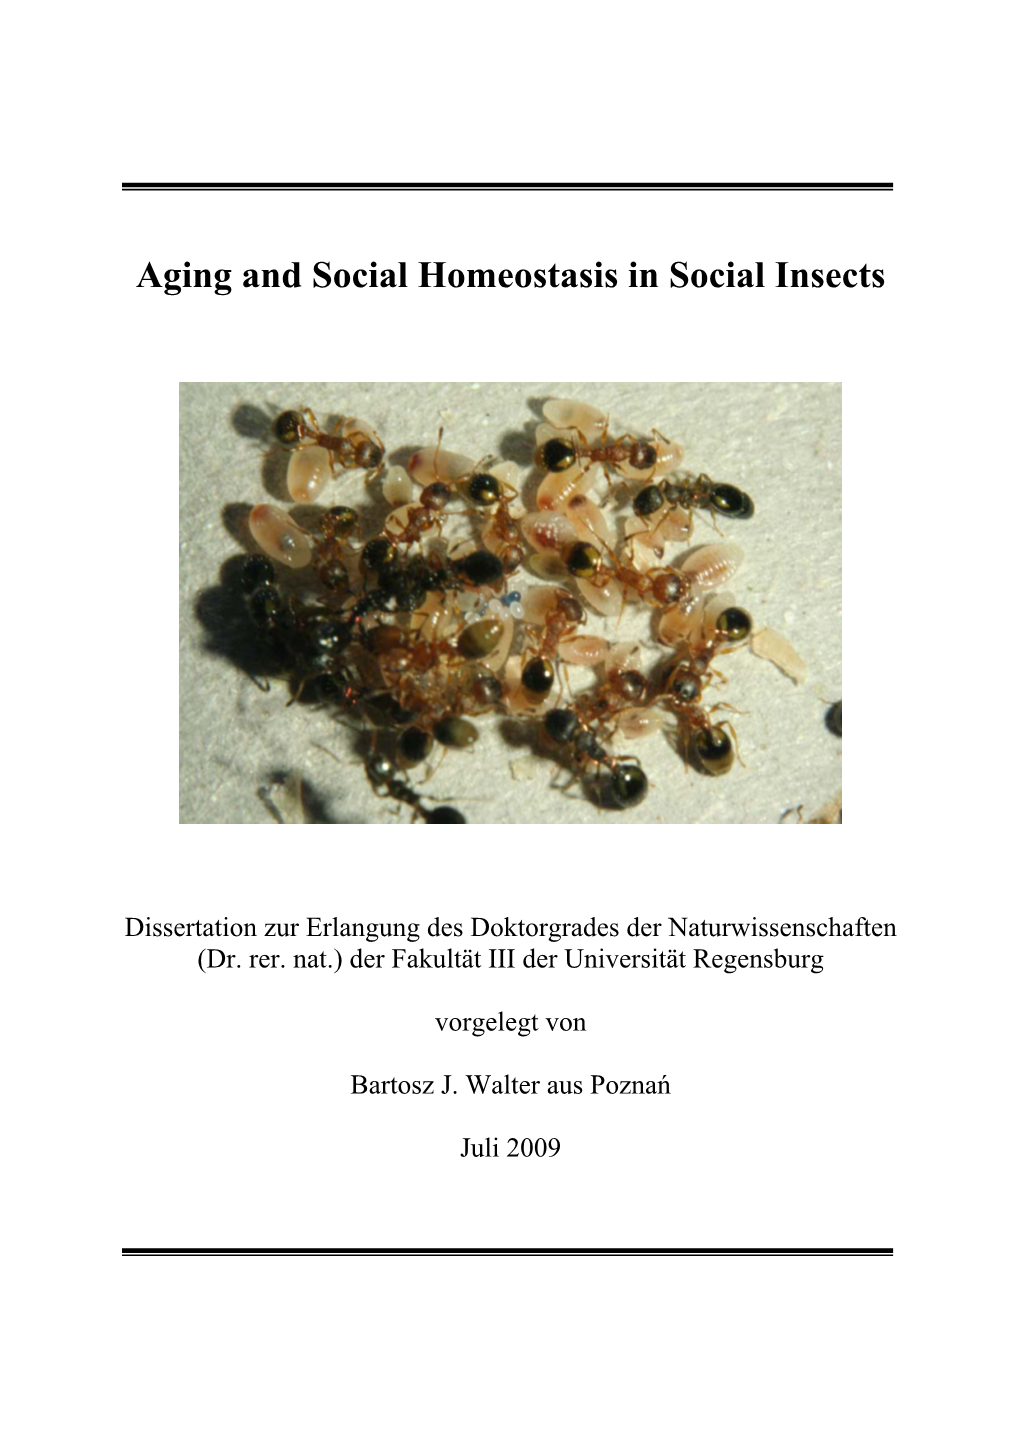 Aging and Social Homeostasis in Social Insects